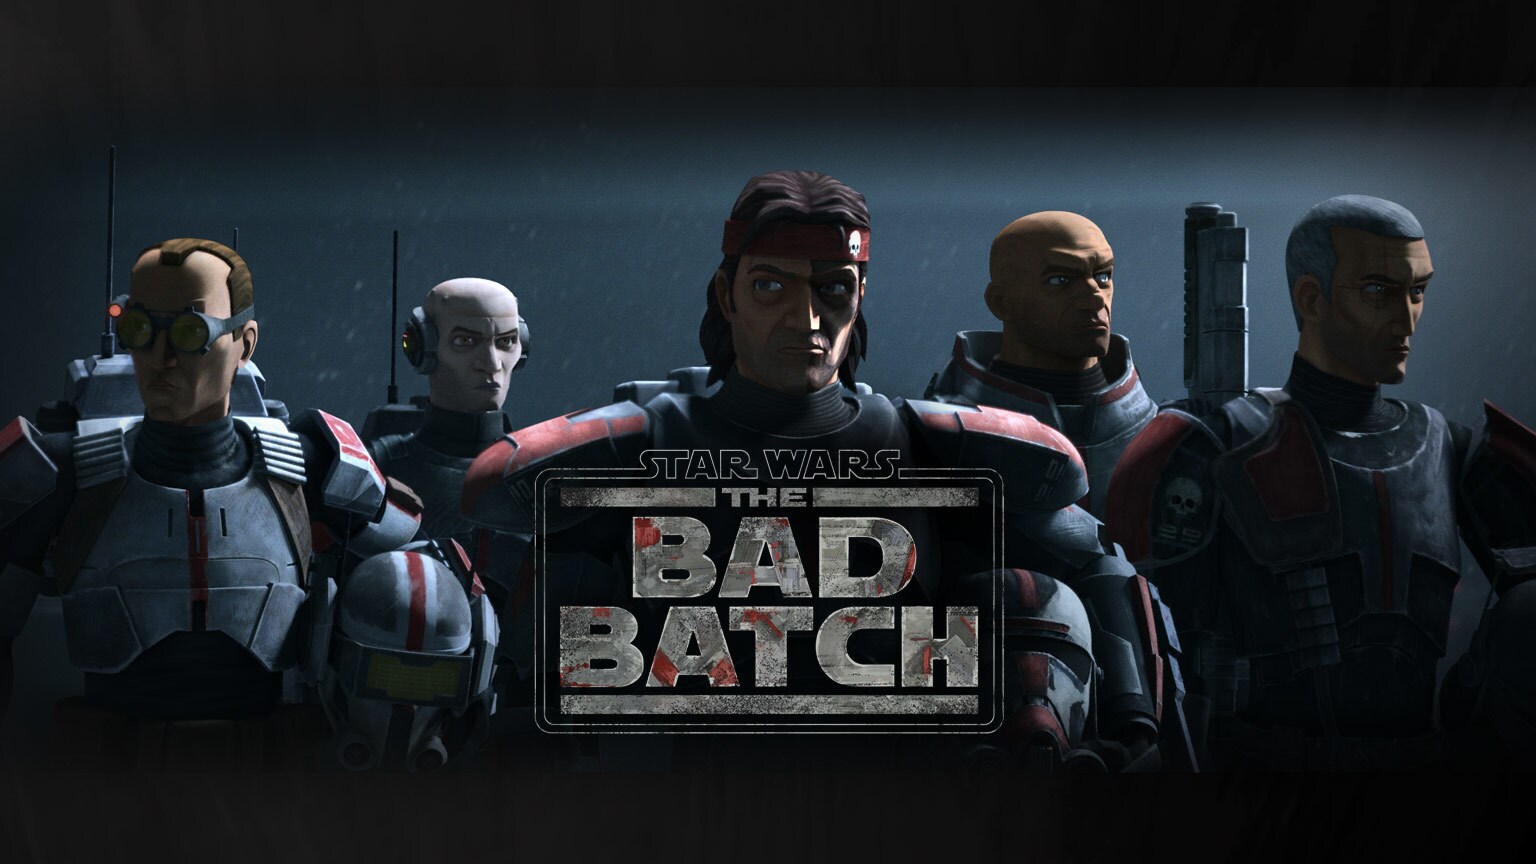 Star Wars: The Bad Batch Will Come to Disney+ on May the 4th